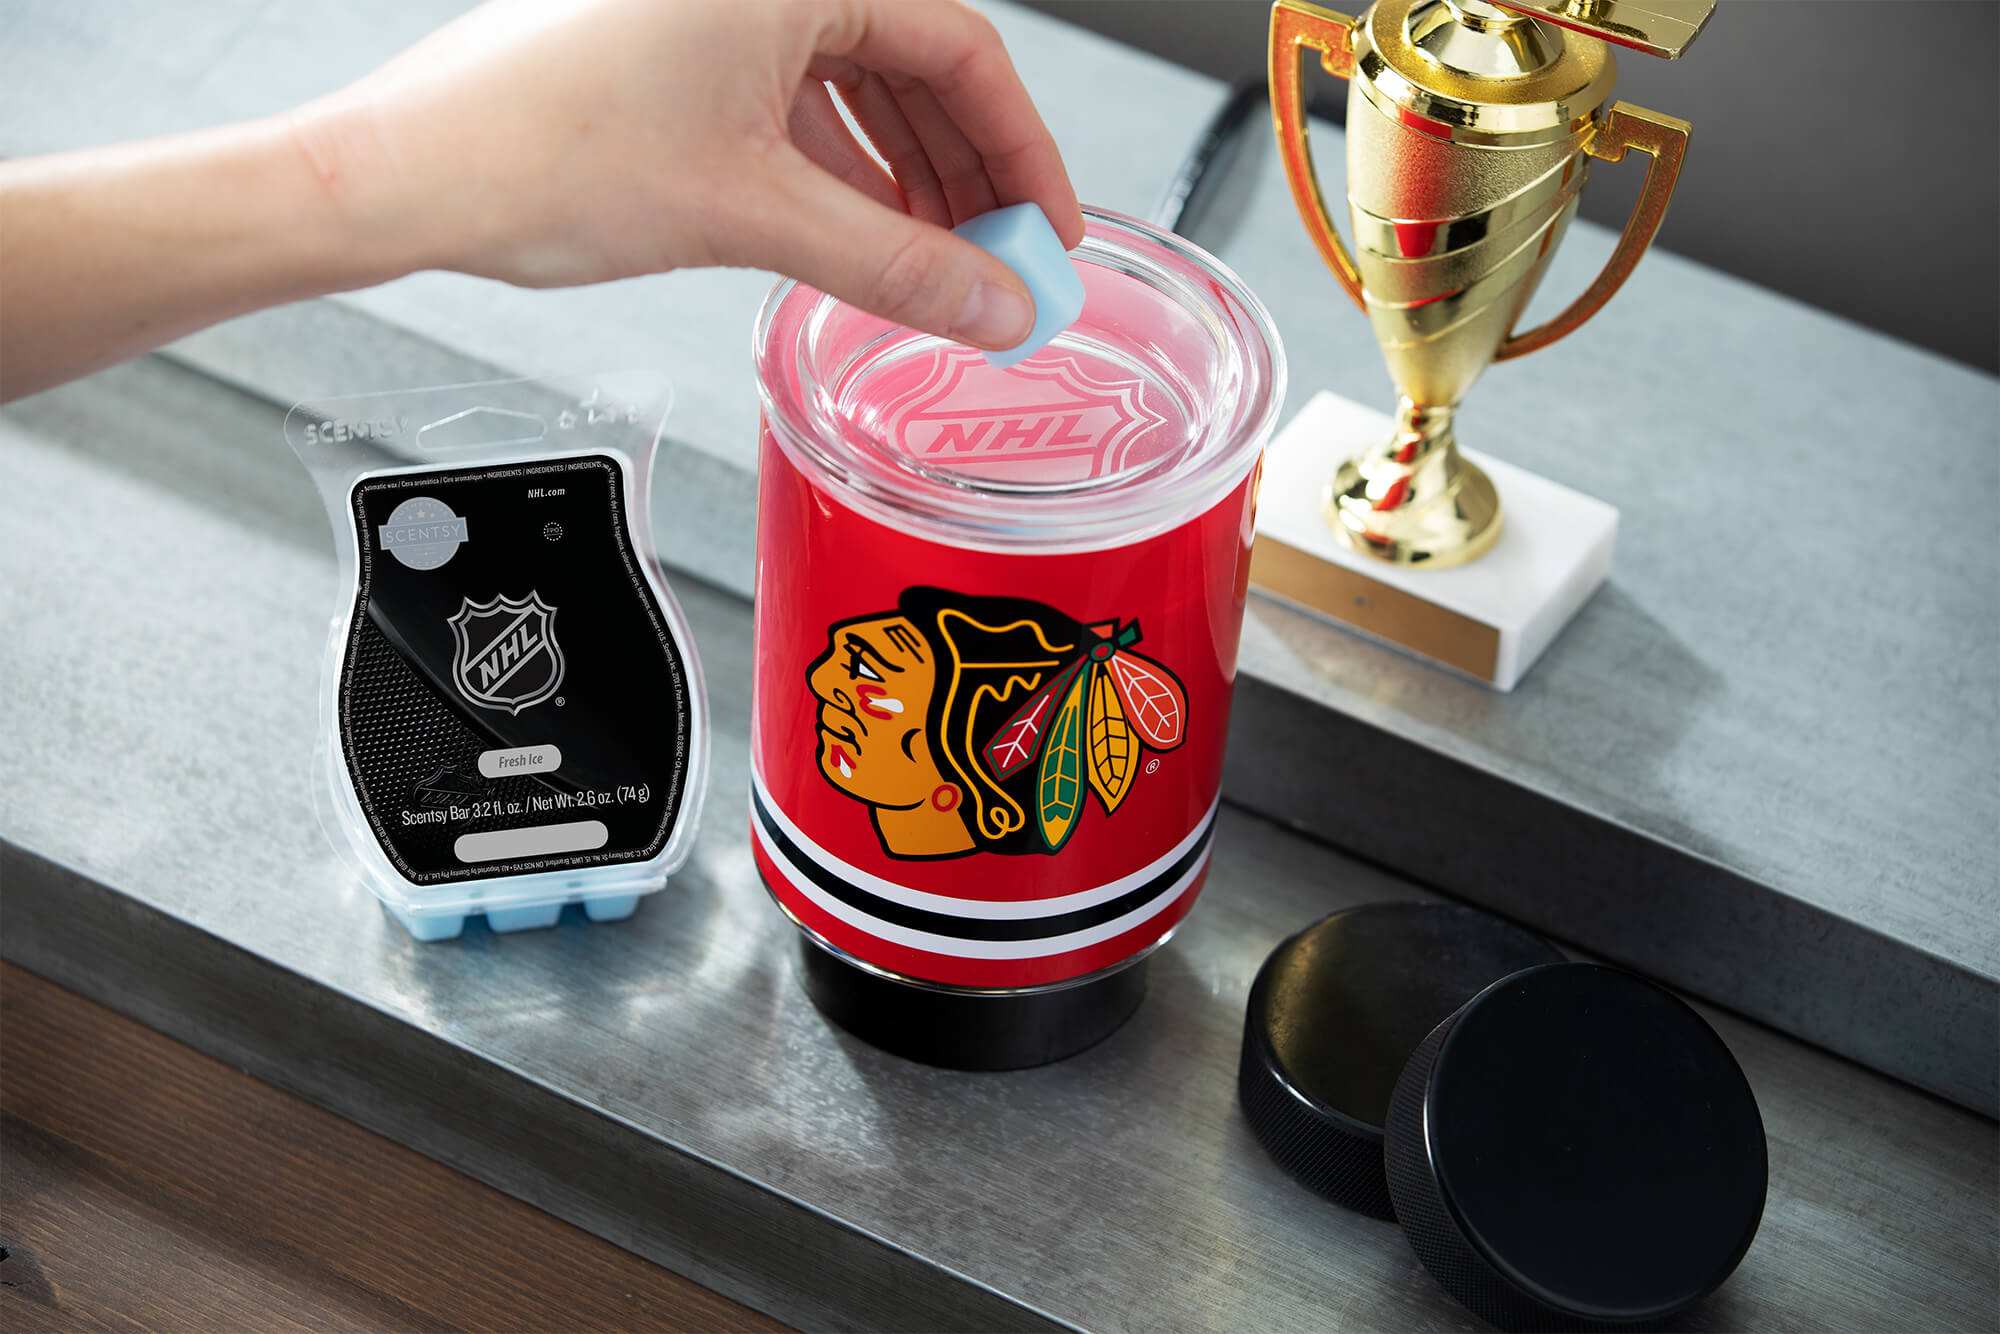 Scentsy NHL Blackhawks mini warmer with Fresh Ice wax with a trophy and hockey pucks nearby